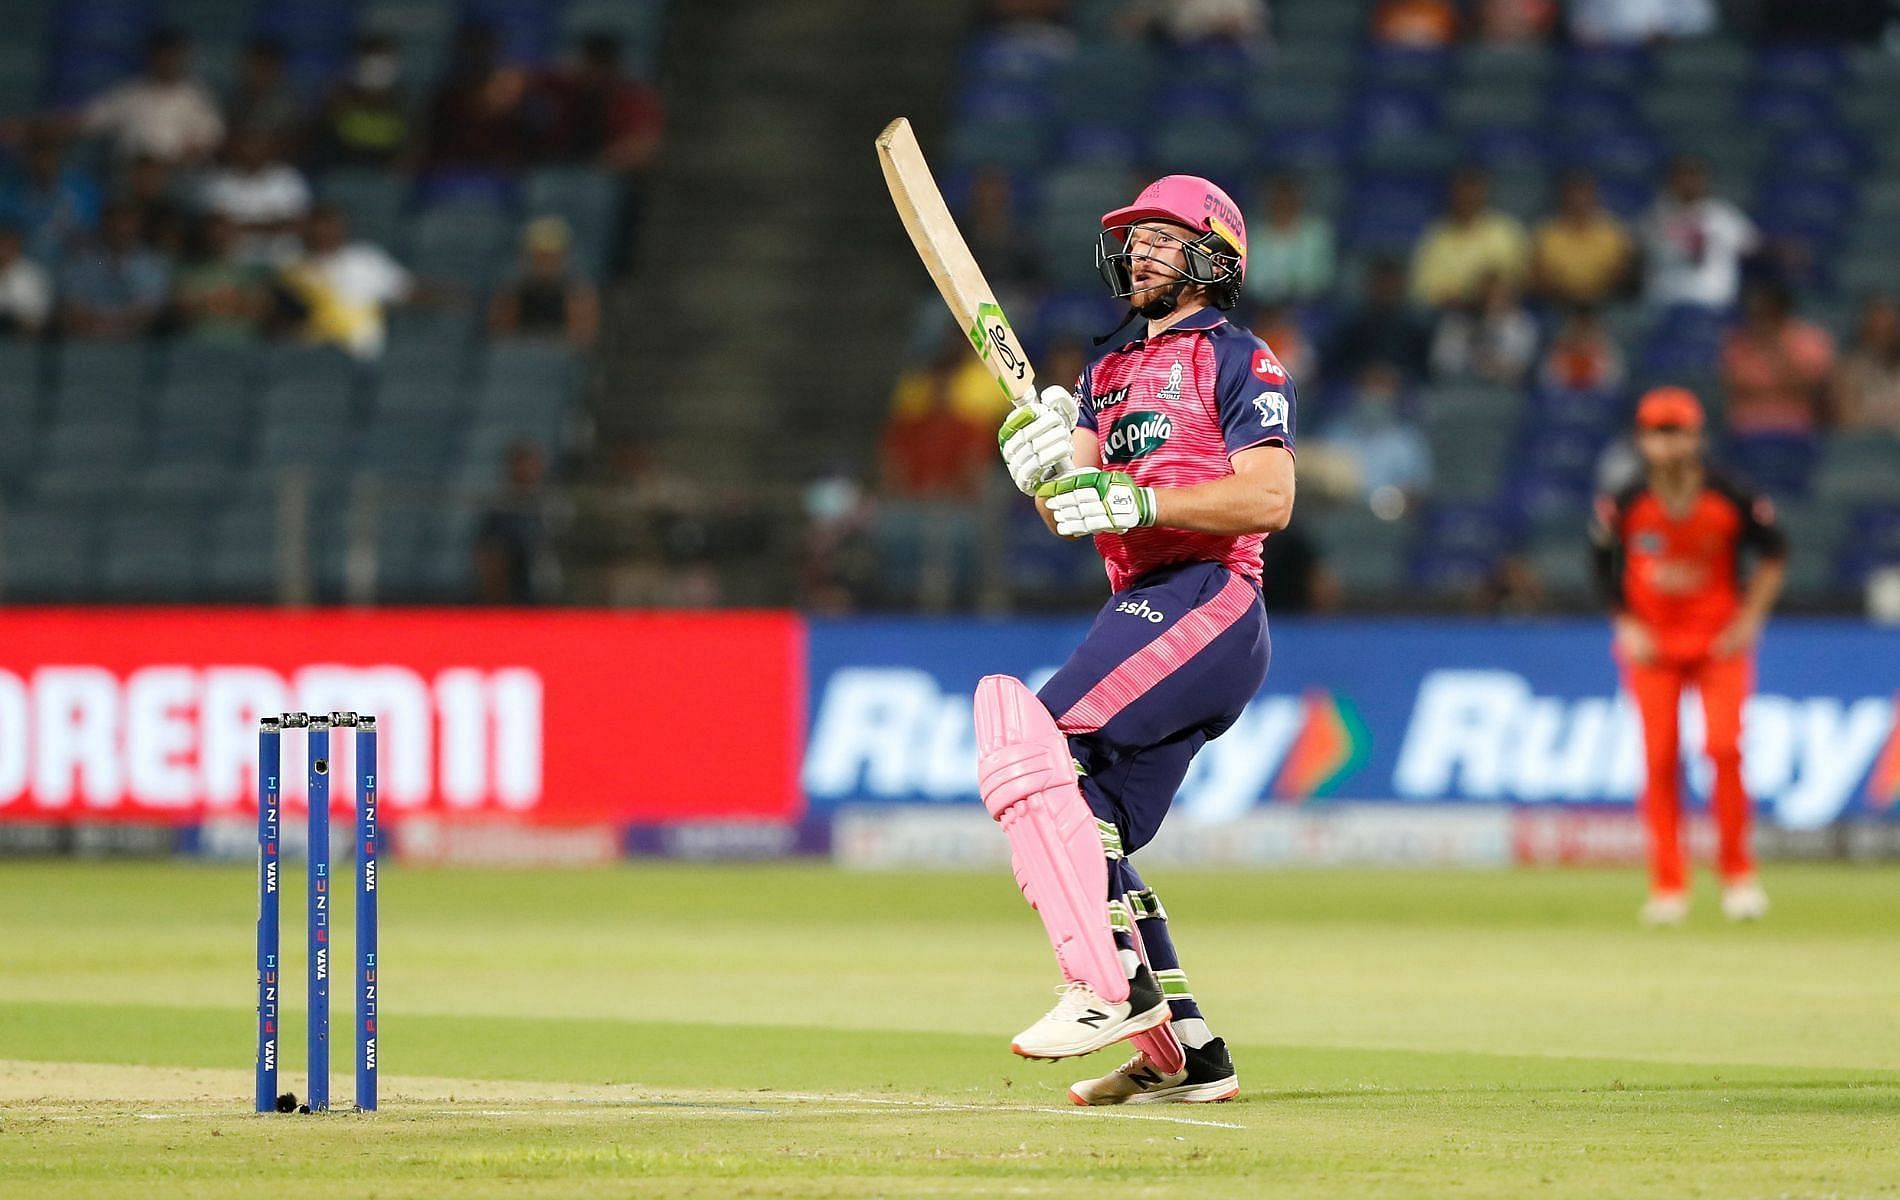 Jos Buttler is action during the IPL. Pic: BCCI